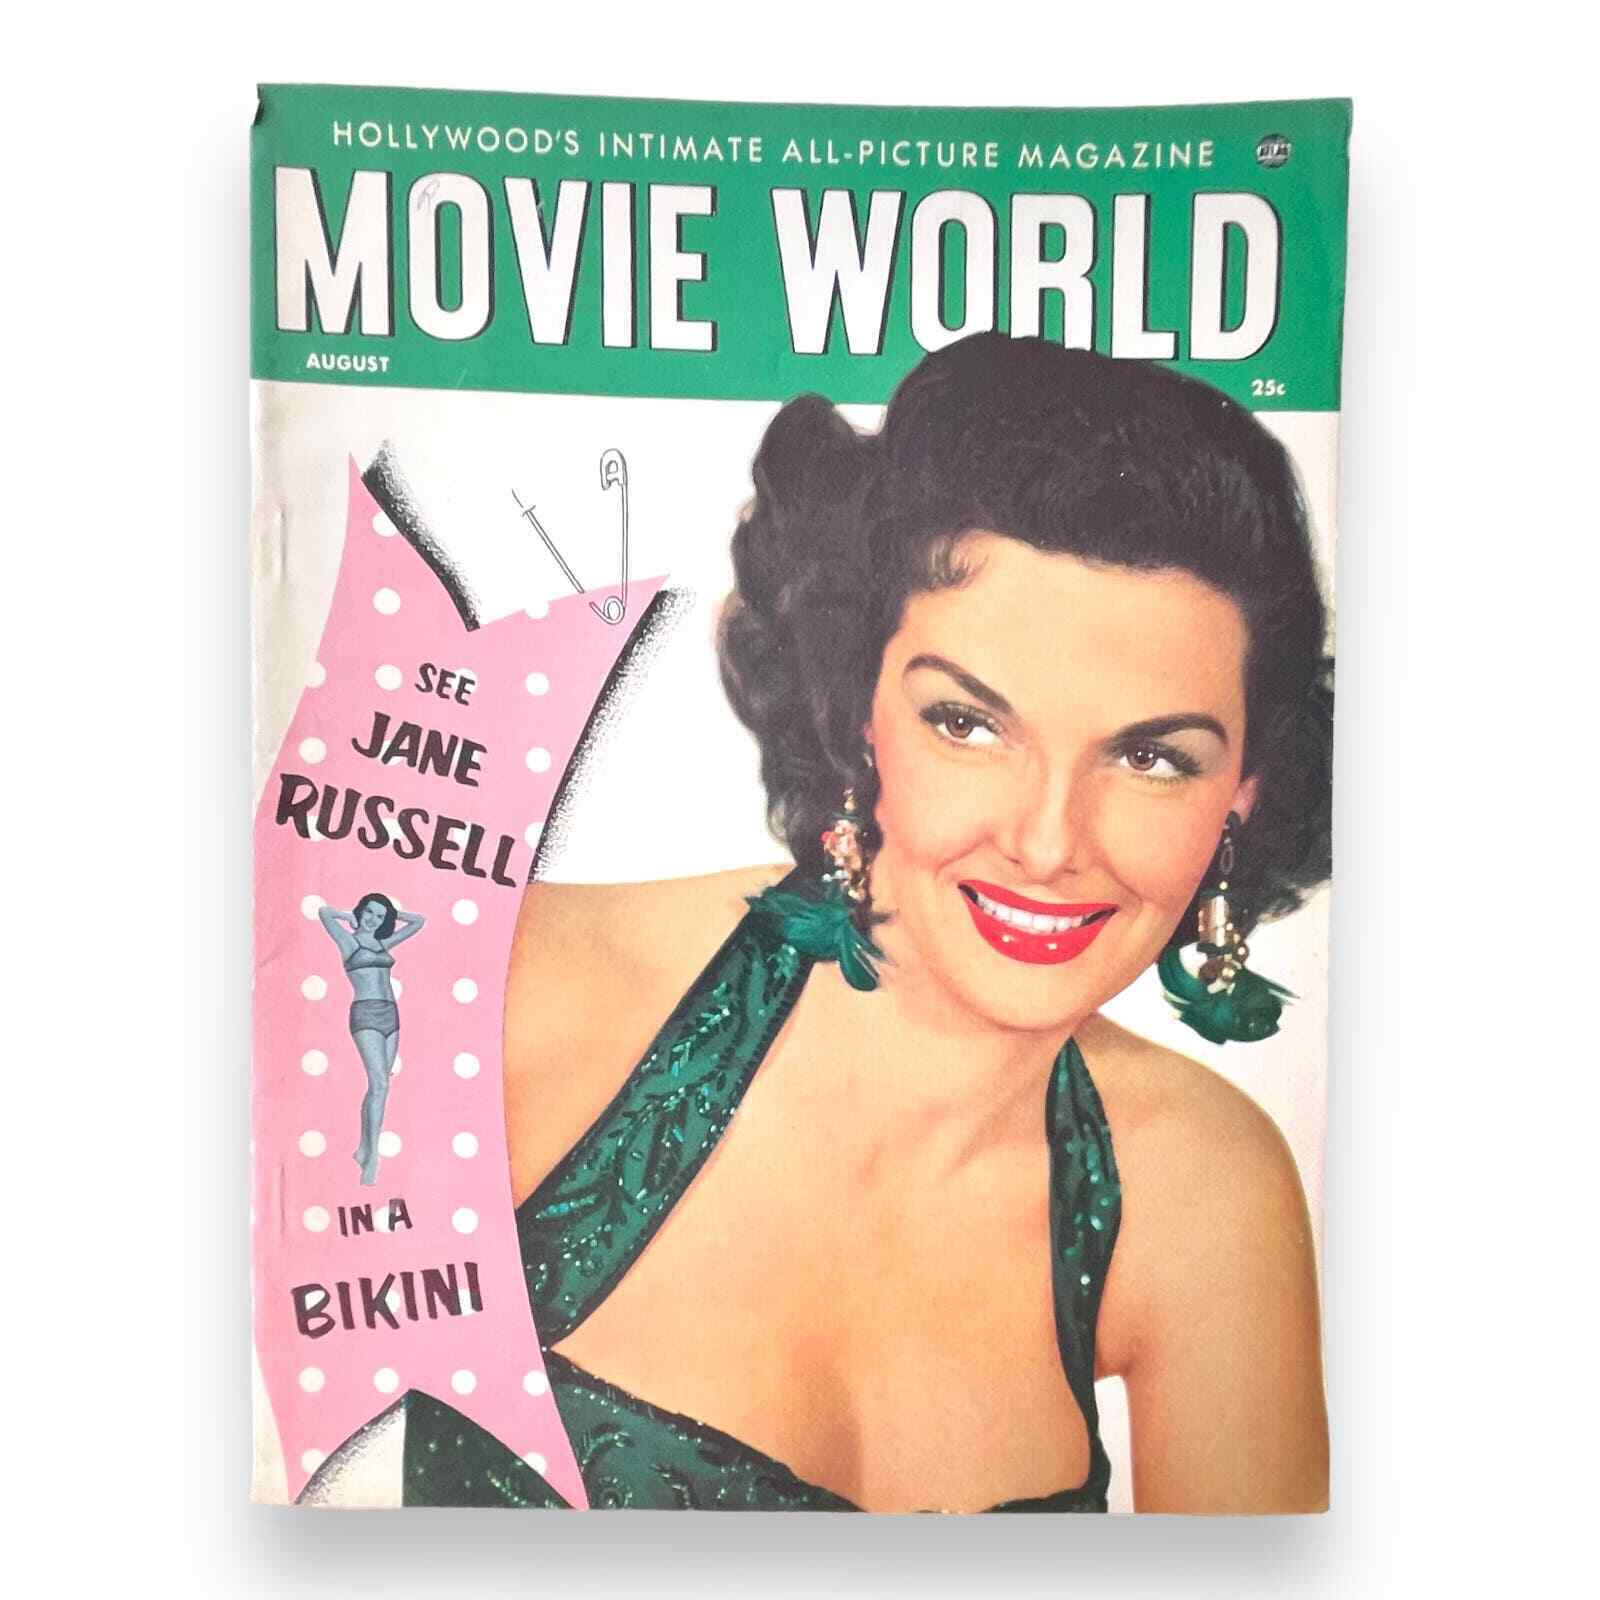 Vintage Pin-Up Jane Russell Swimsuit Cover of Movie World Magazine, August 1954